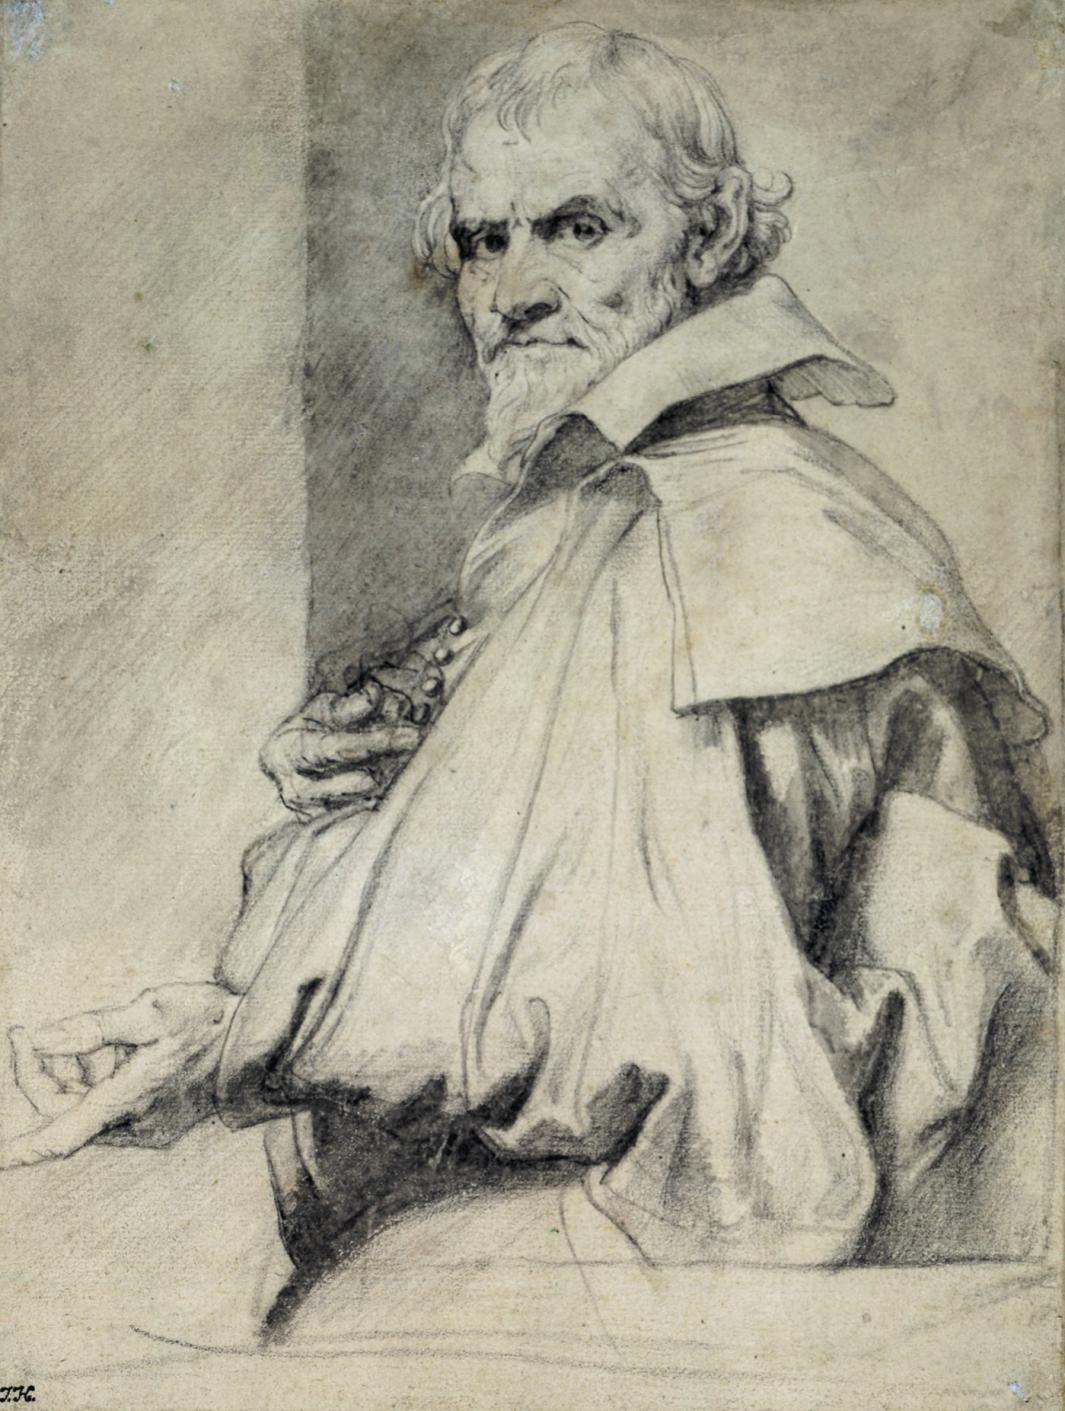 black chalk drawing of old man with pointed beard, wearing cloak and large folded collar